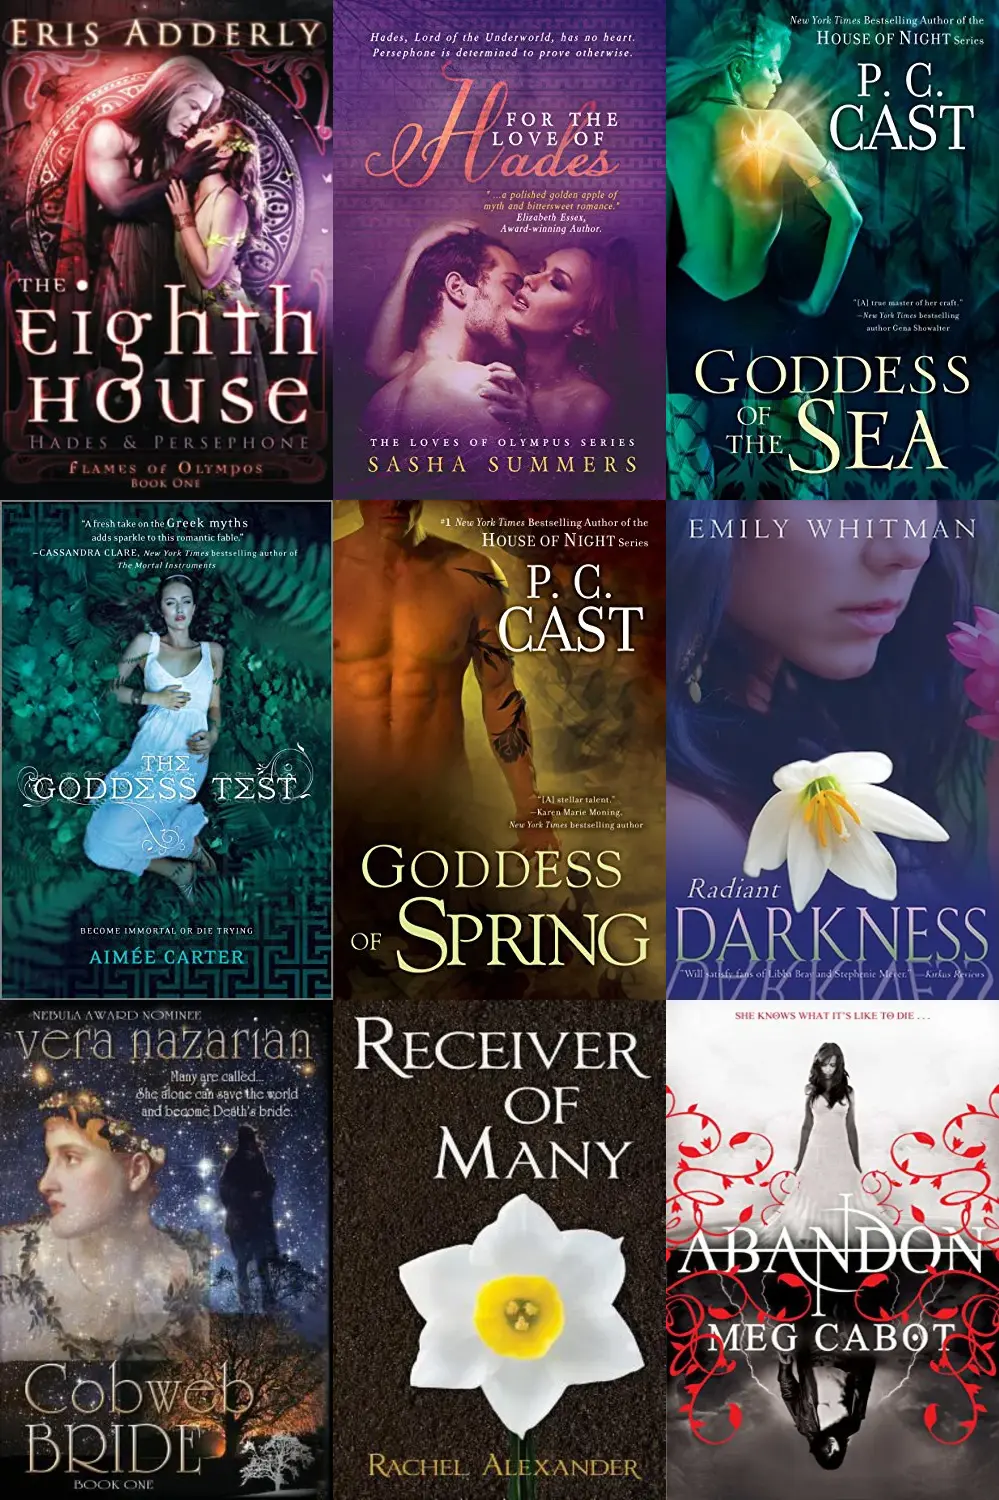 The Eighth House: Hades & Persephone by Adderly, Eris